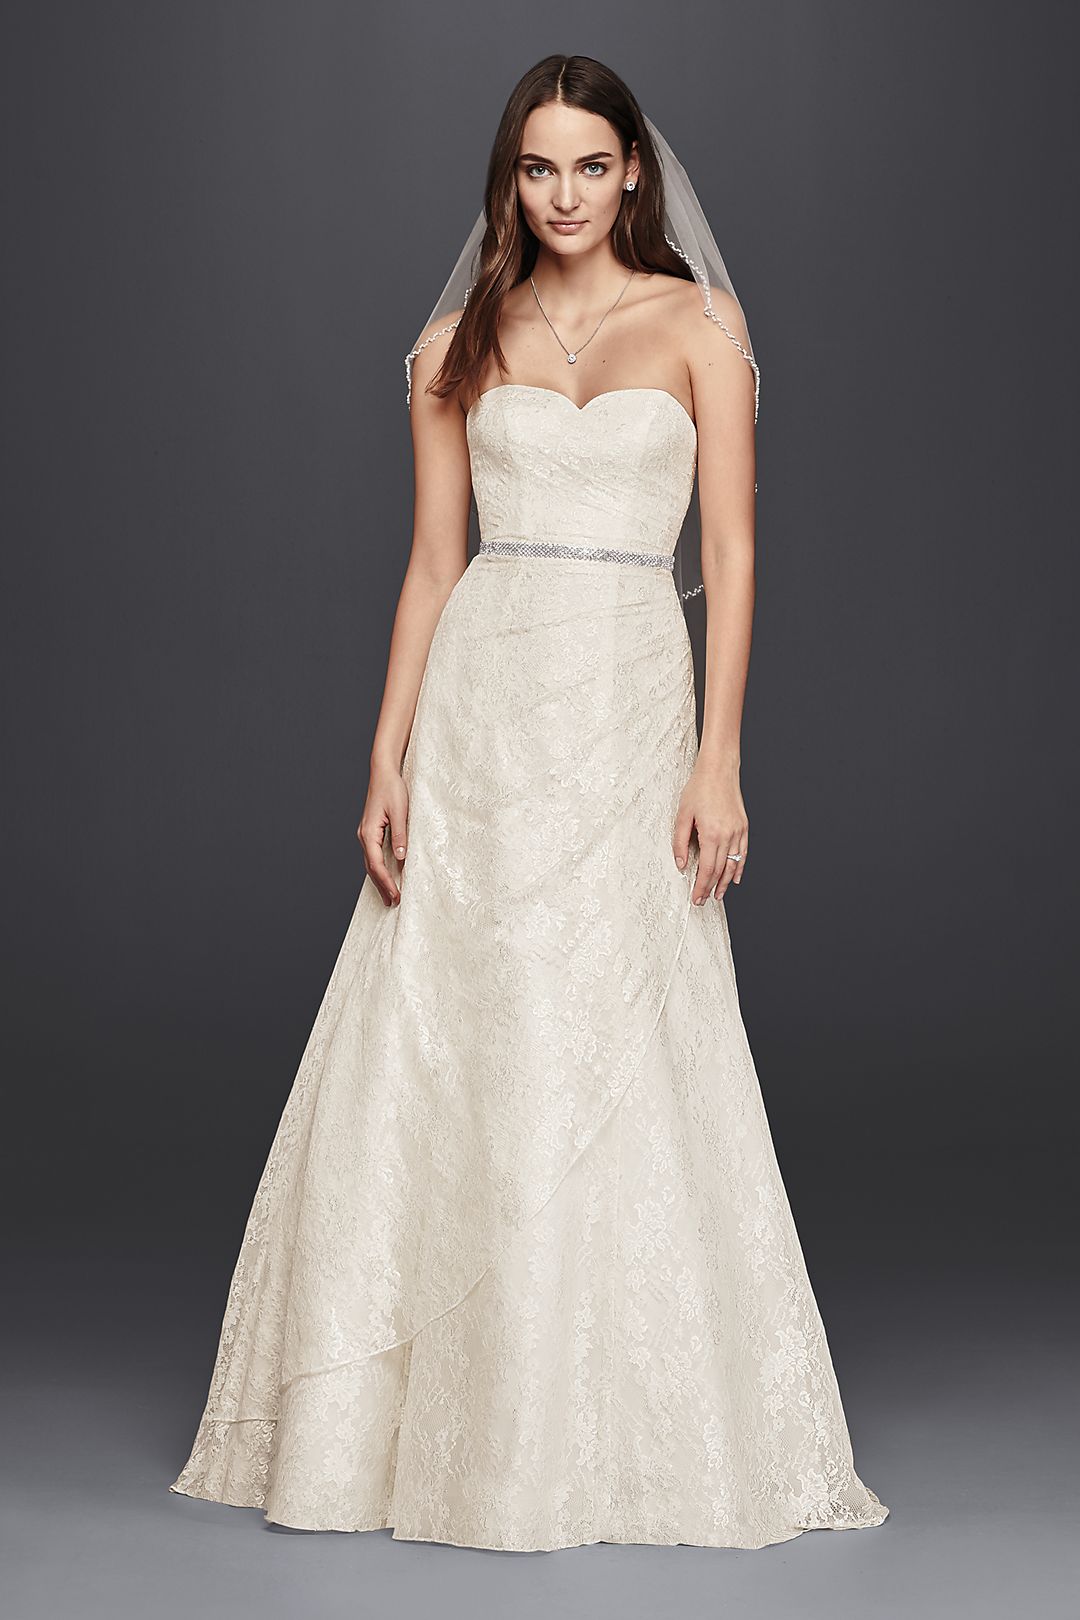 As-Is Lace A-Line Strapless Wedding Dress Image 4